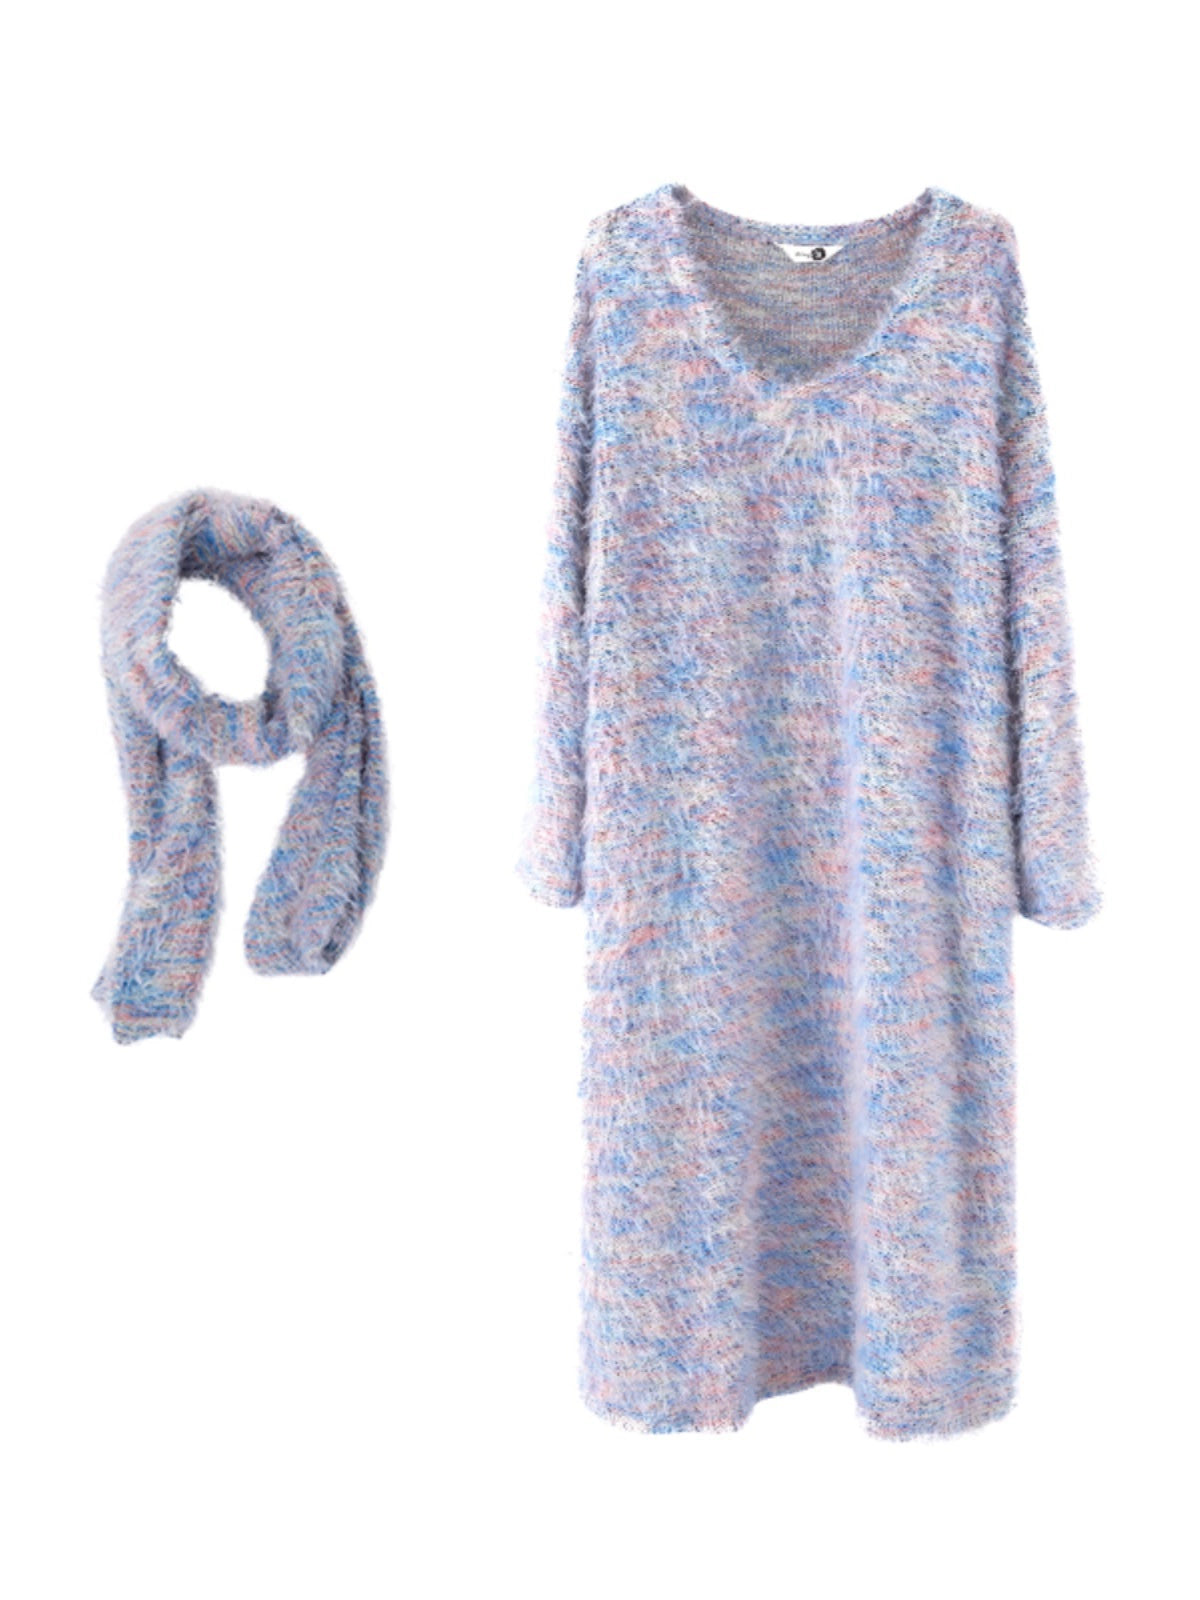 Blue Wind Chime Knitted Top Dress